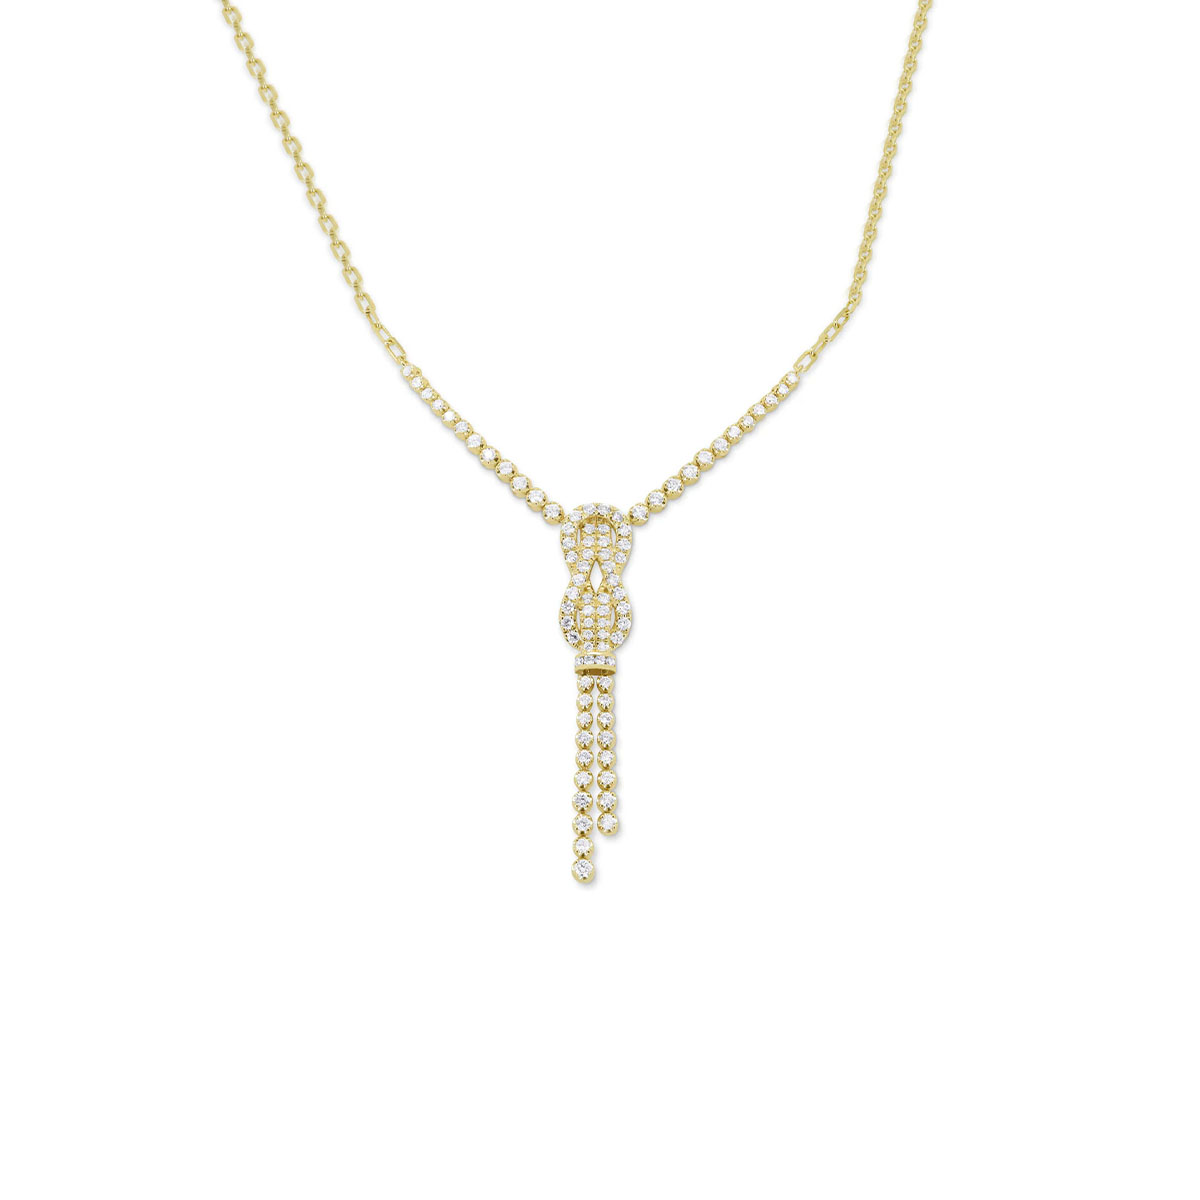 14K Yellow Gold Diamond Infinity Knot Lariant Necklace